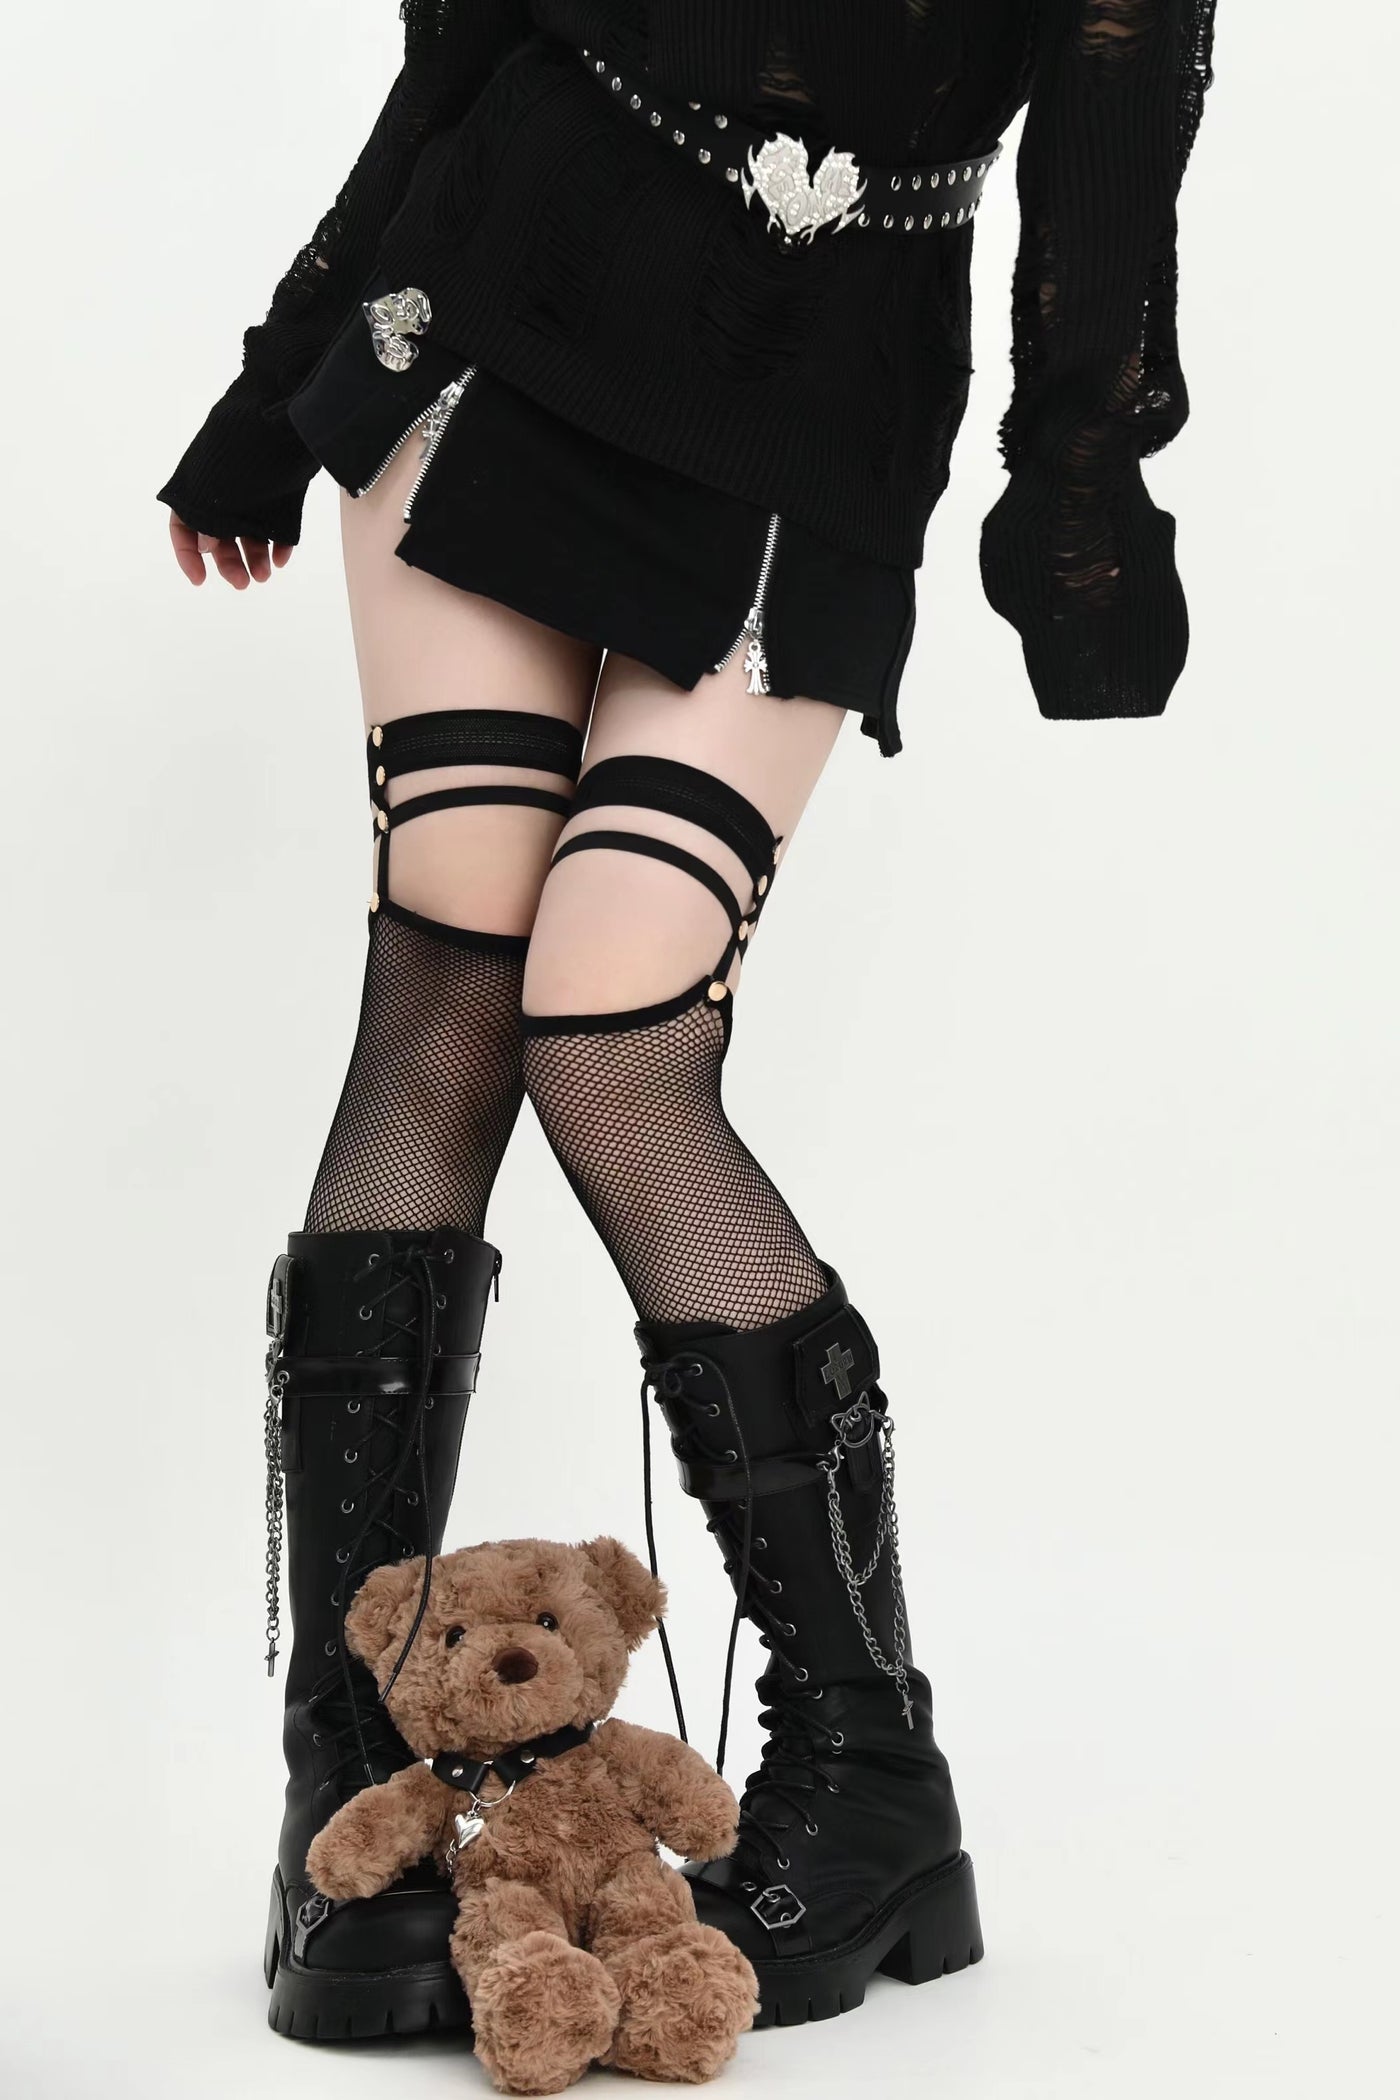 Arrive on the first floor~Punk Lolita Lace Stockings free size black 